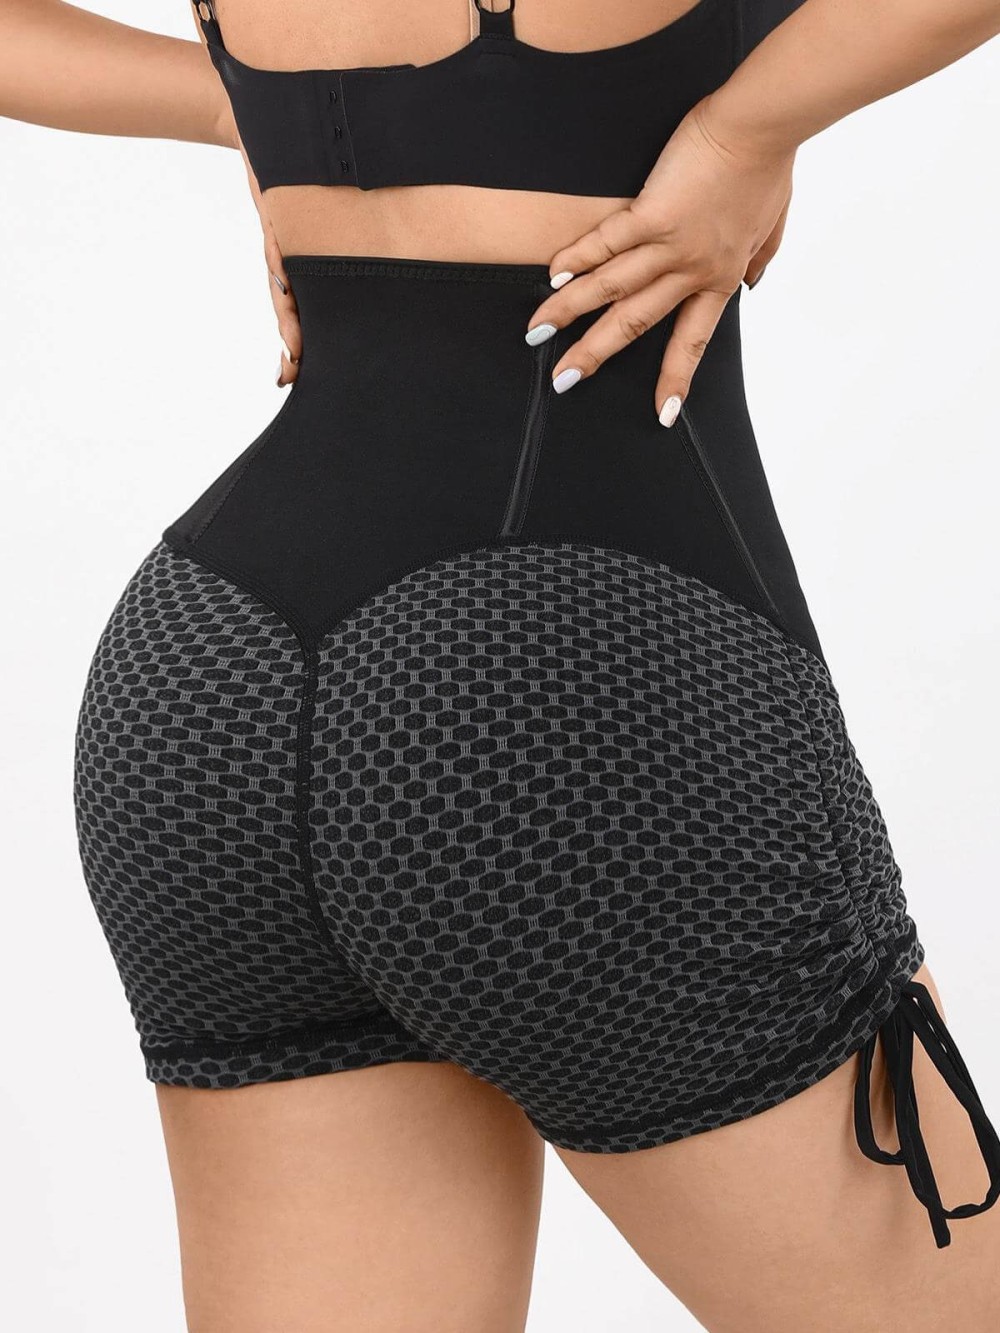 New 2 In 1 Neoprene Waist Trainer And Butt Lifter Yoga Pants